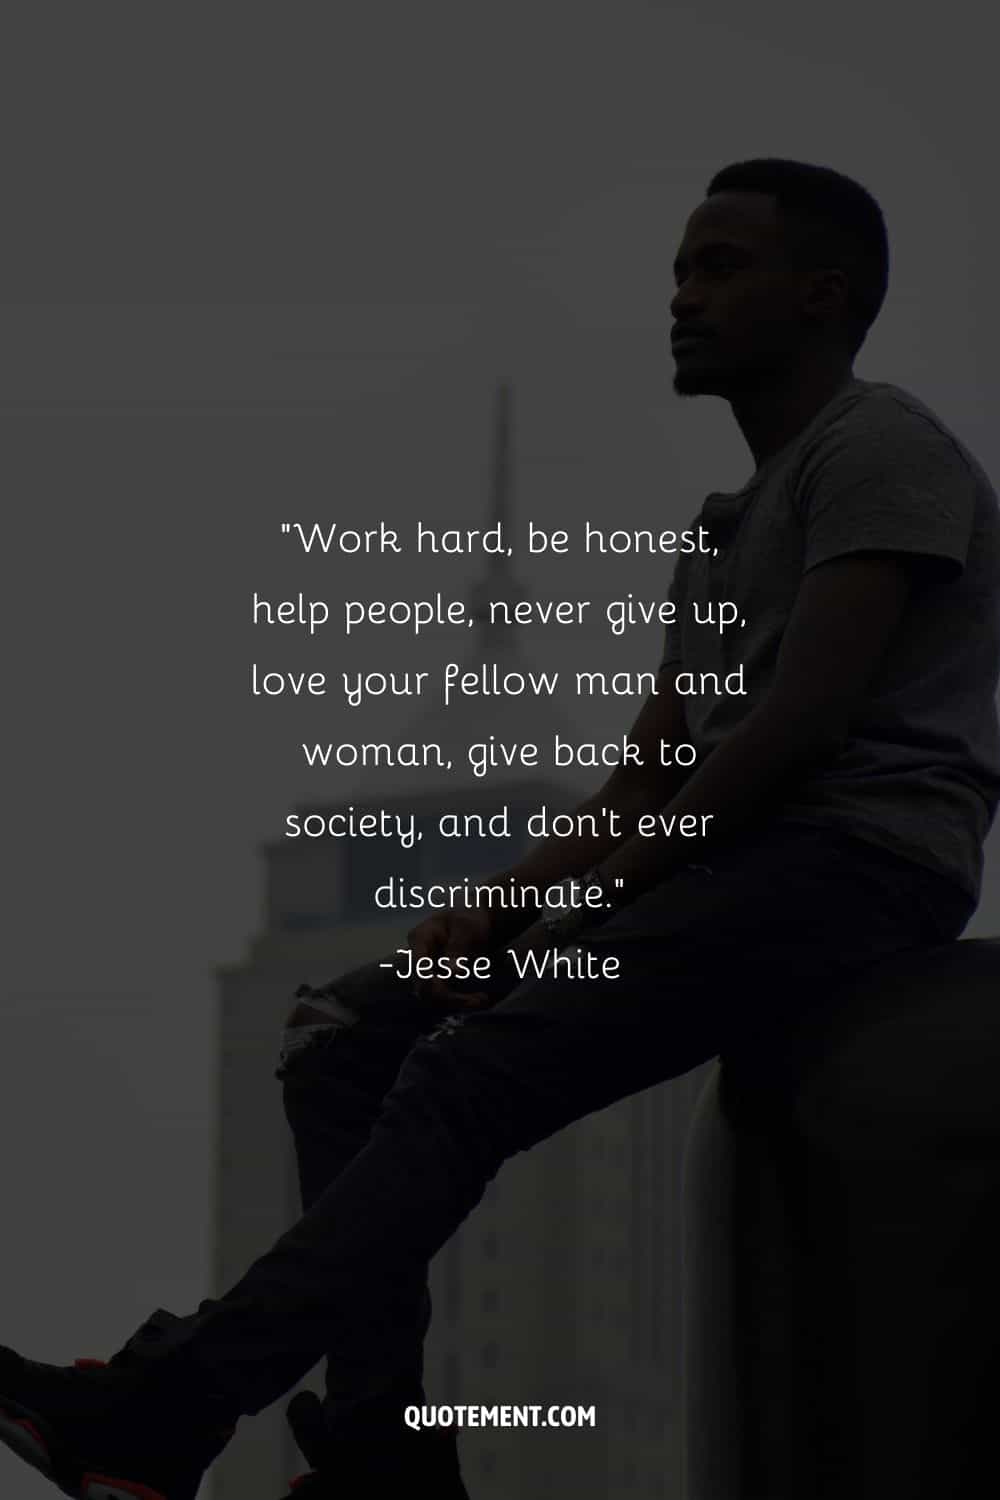 Work hard, be honest, help people, never give up, love your fellow man and woman, give back to society, and don’t ever discriminate